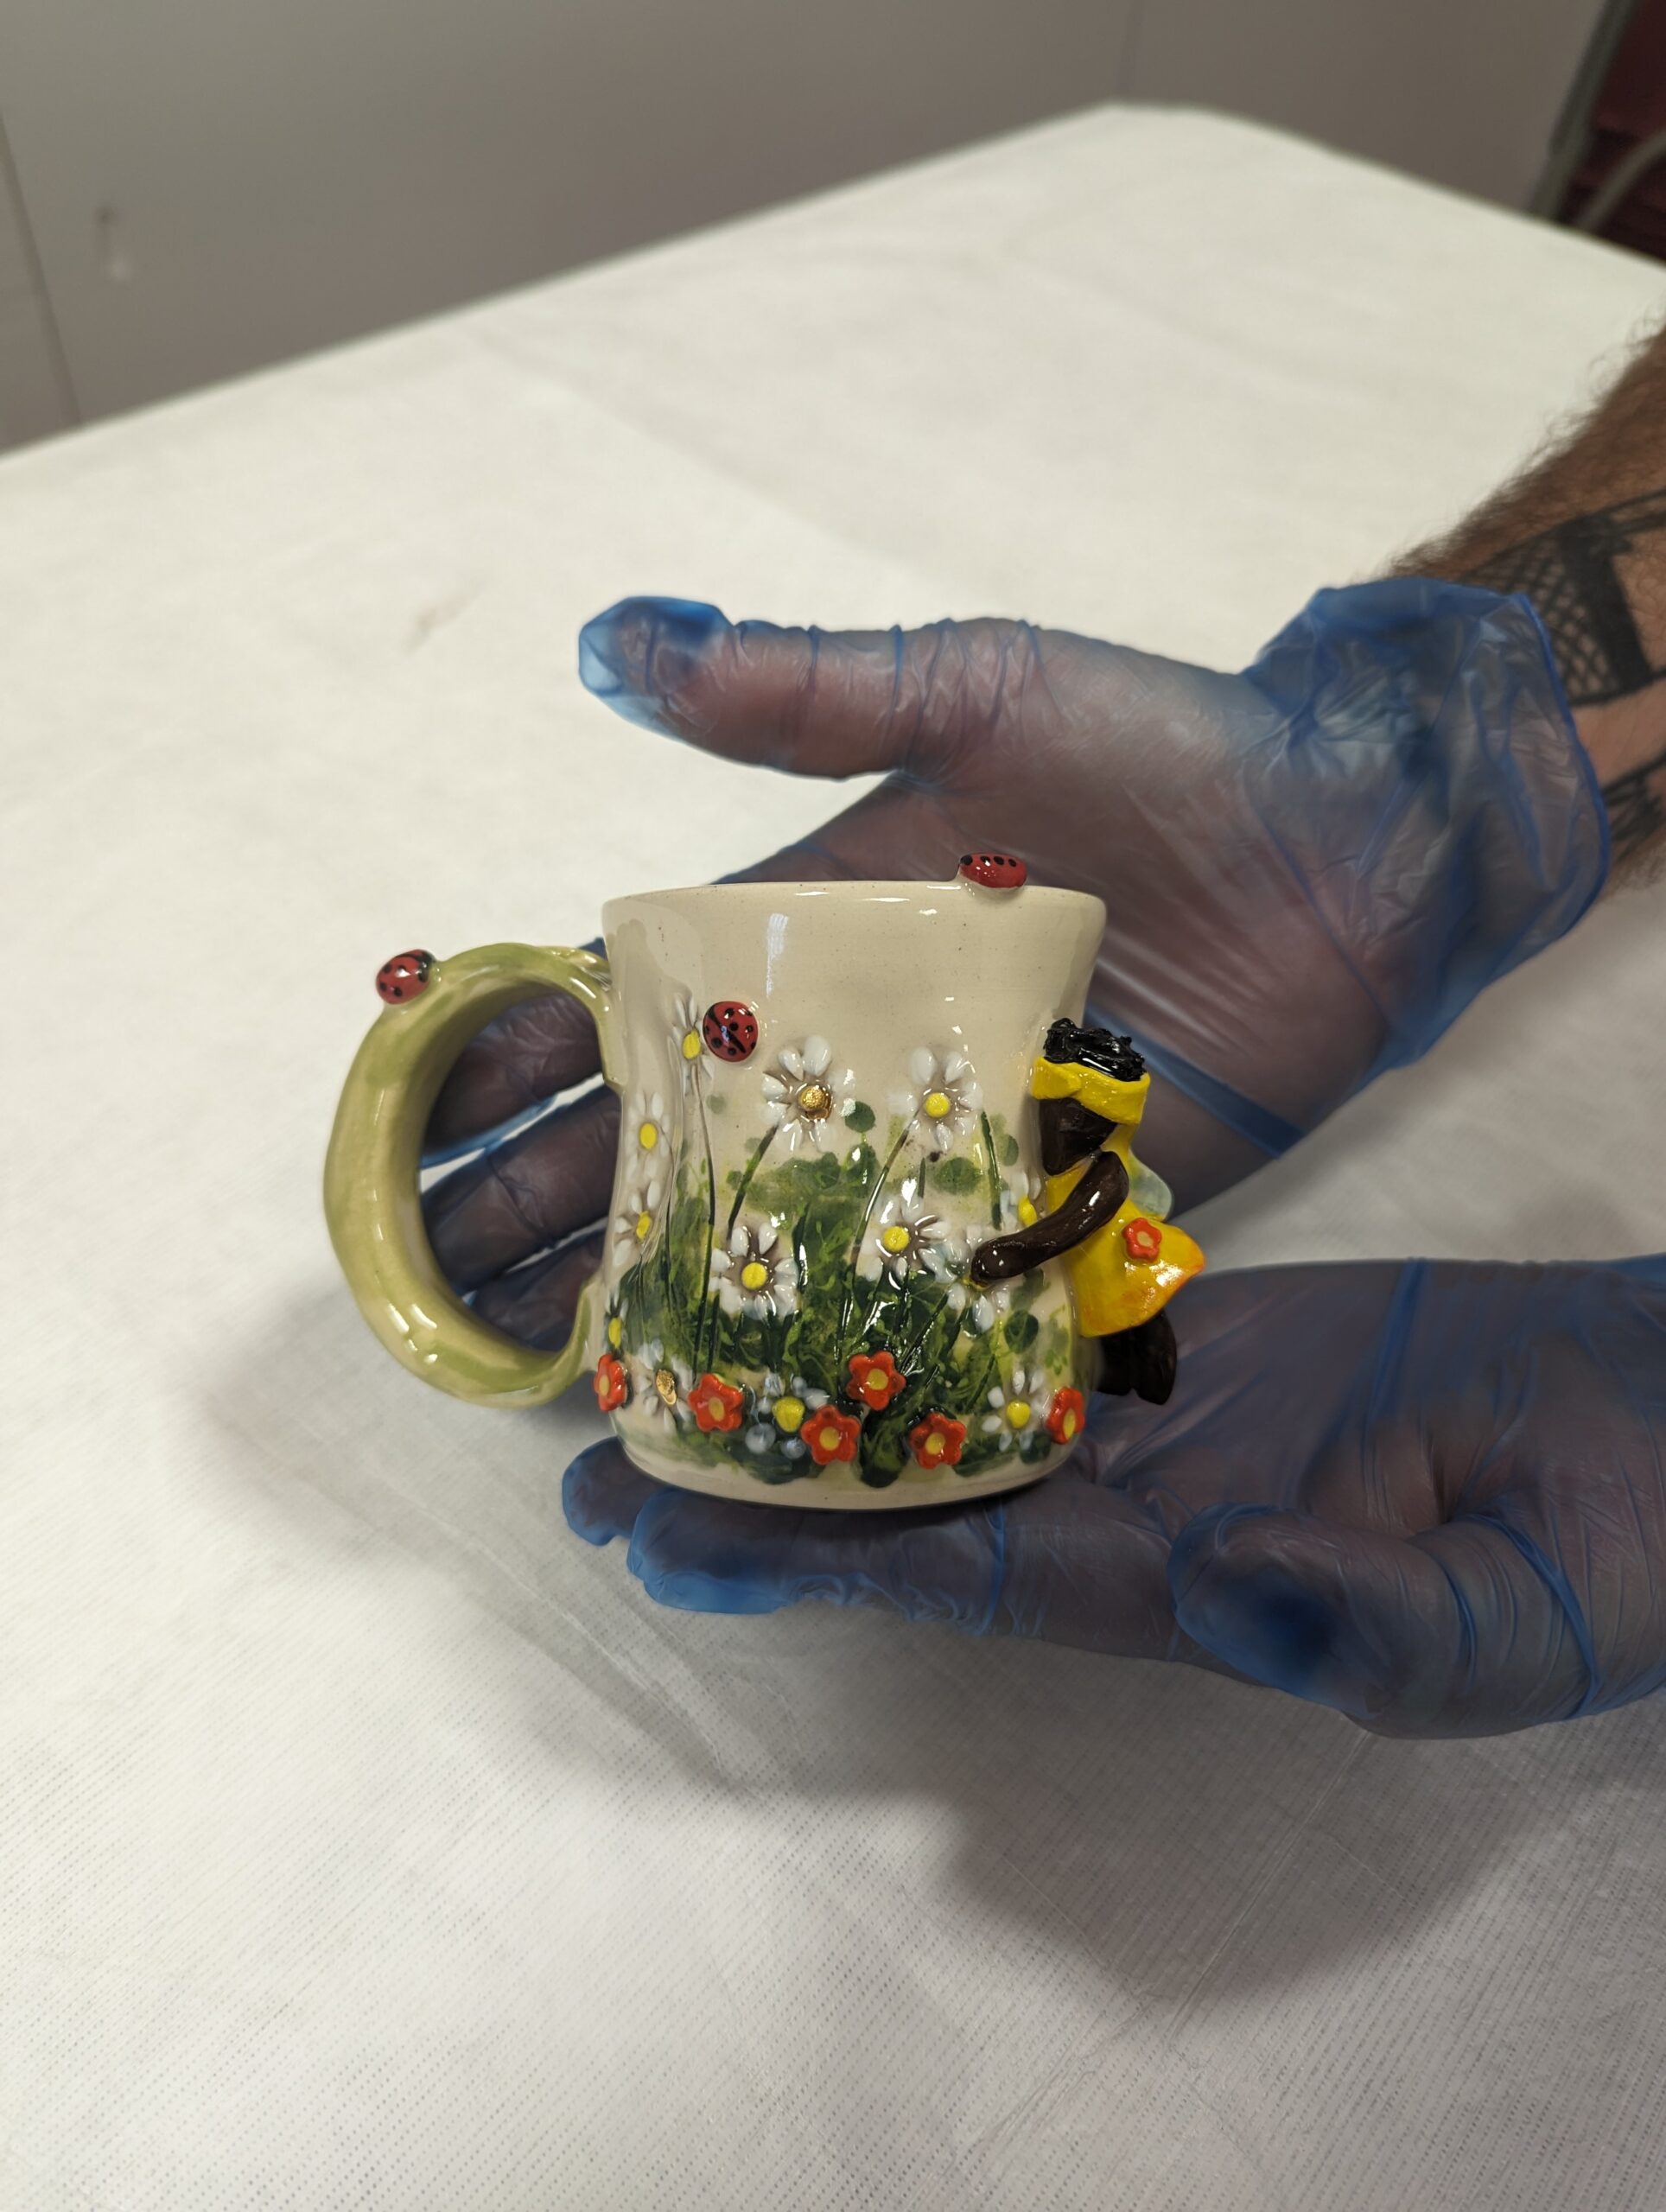 A pair of hands in blue gloves hold a small cream and green ceramic mug decorated with flowers and a fairy.